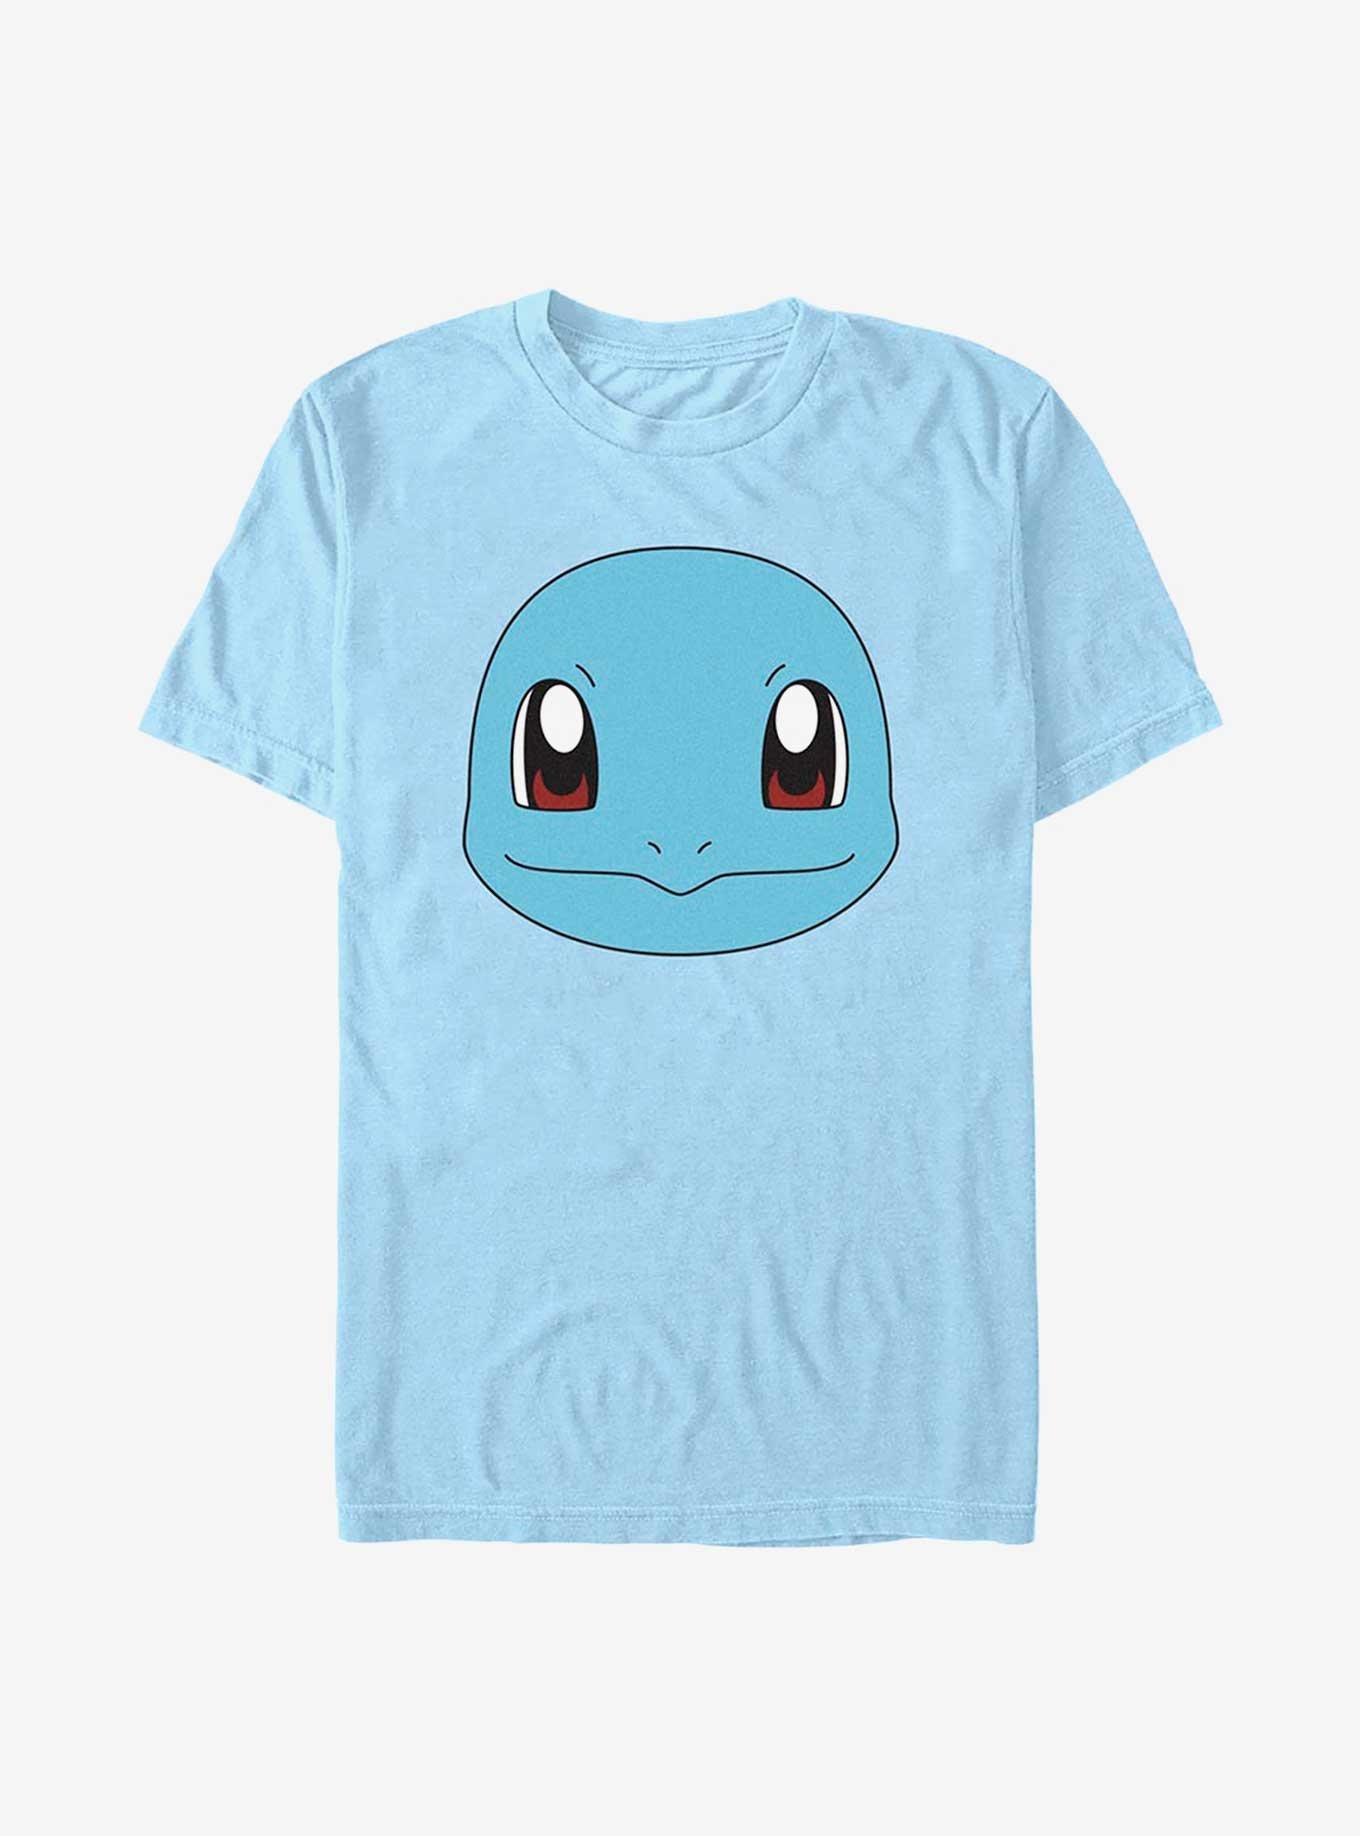 Pokemon Squirtle Face T-Shirt